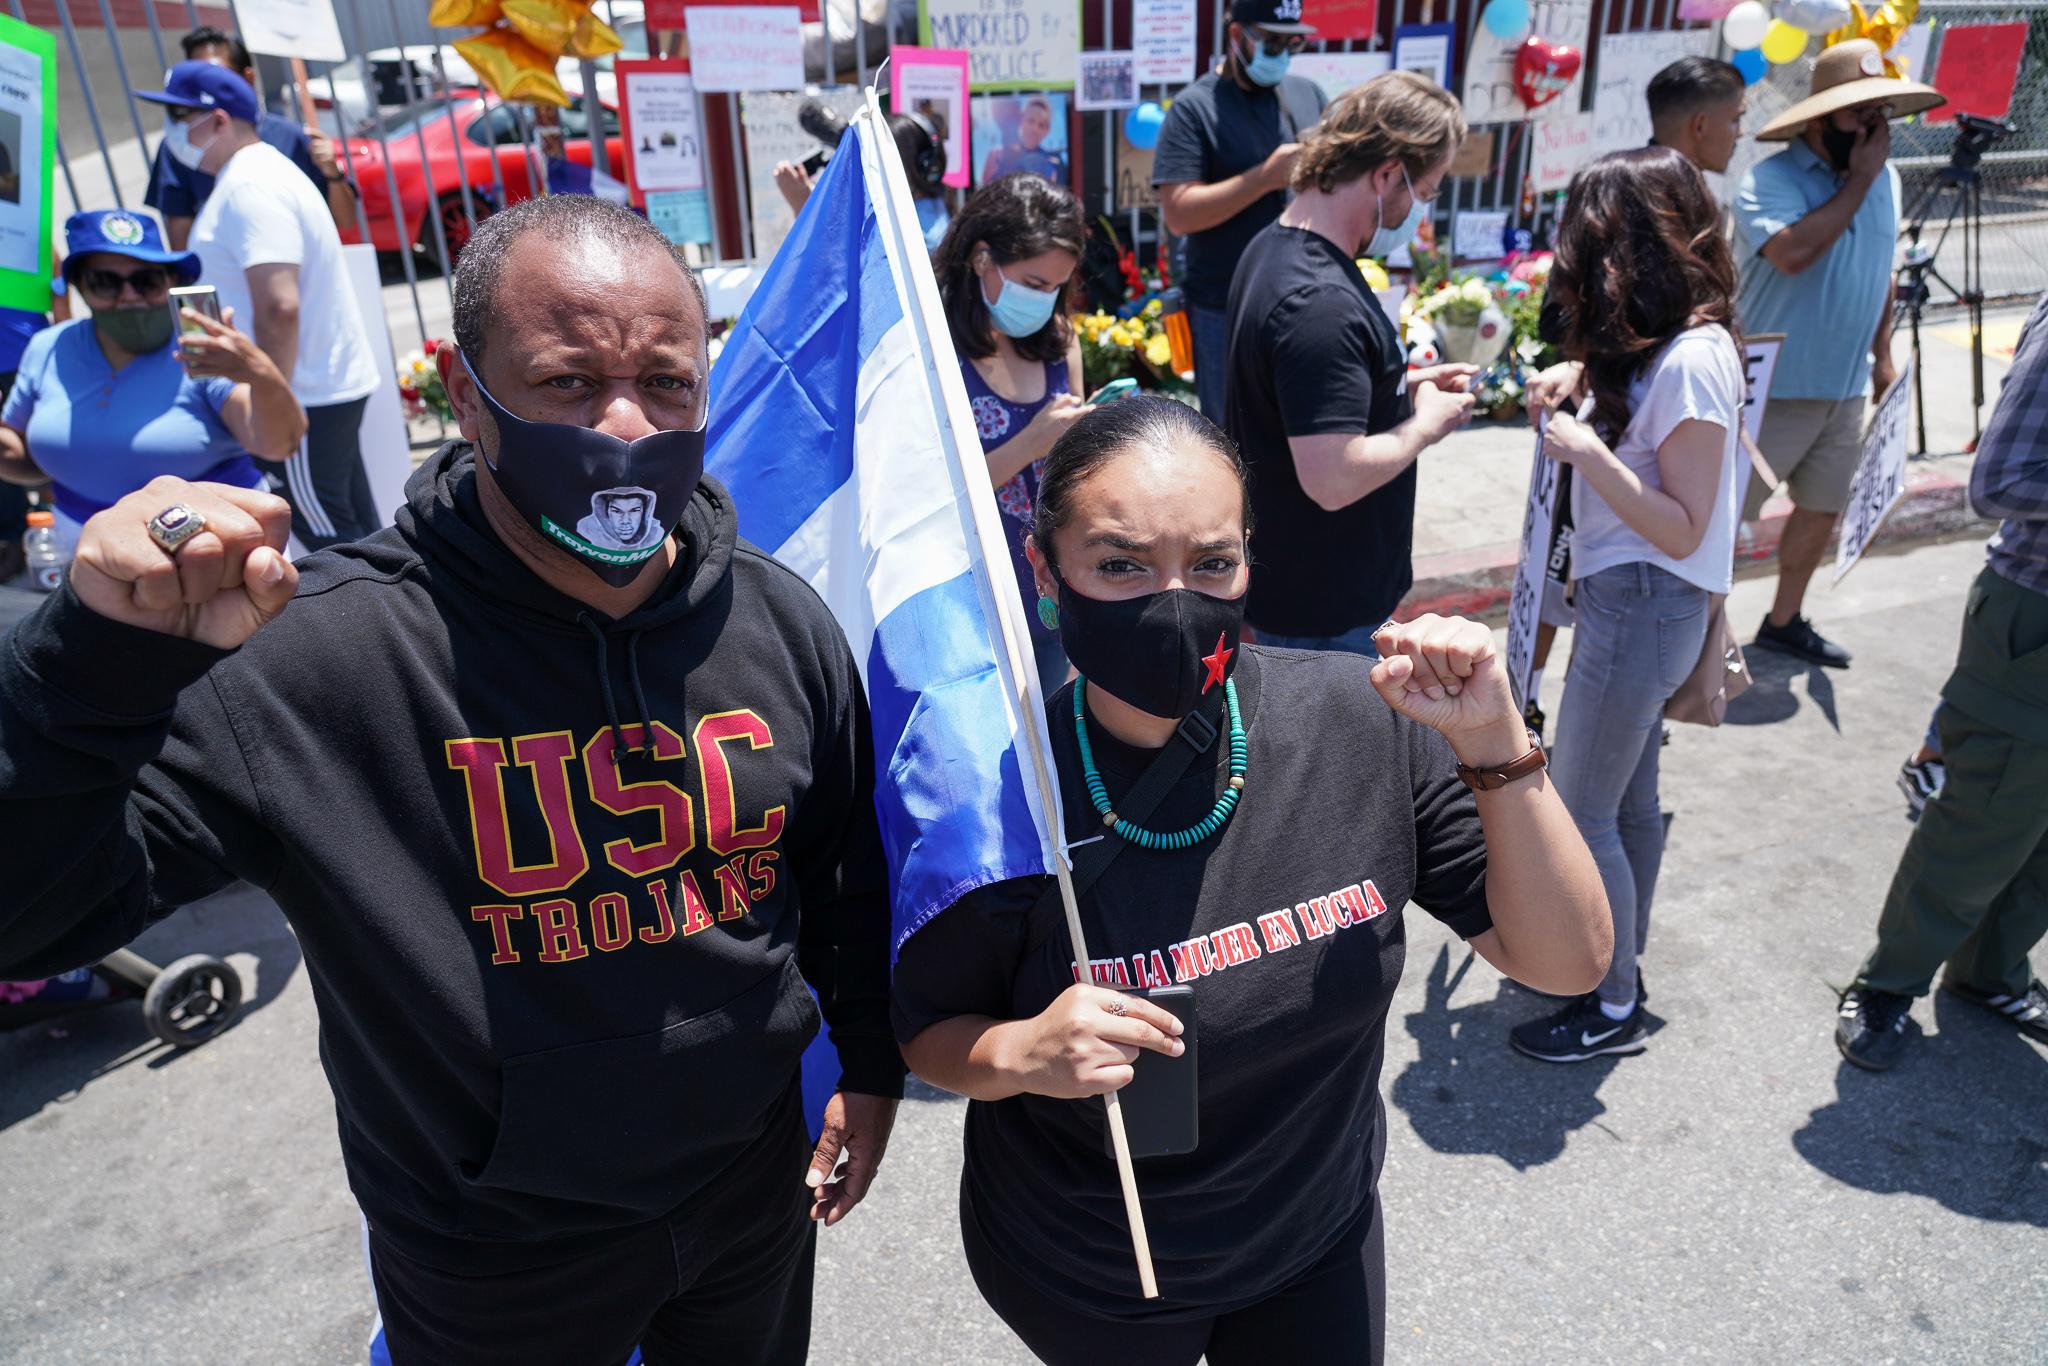 Long time South L.A. activist Najee Ali (left) joins forces with Unión del Barrio Immigrant Advocacy Group Desiree Gaytán (right) before the march started. Photo: Francisco Lozano